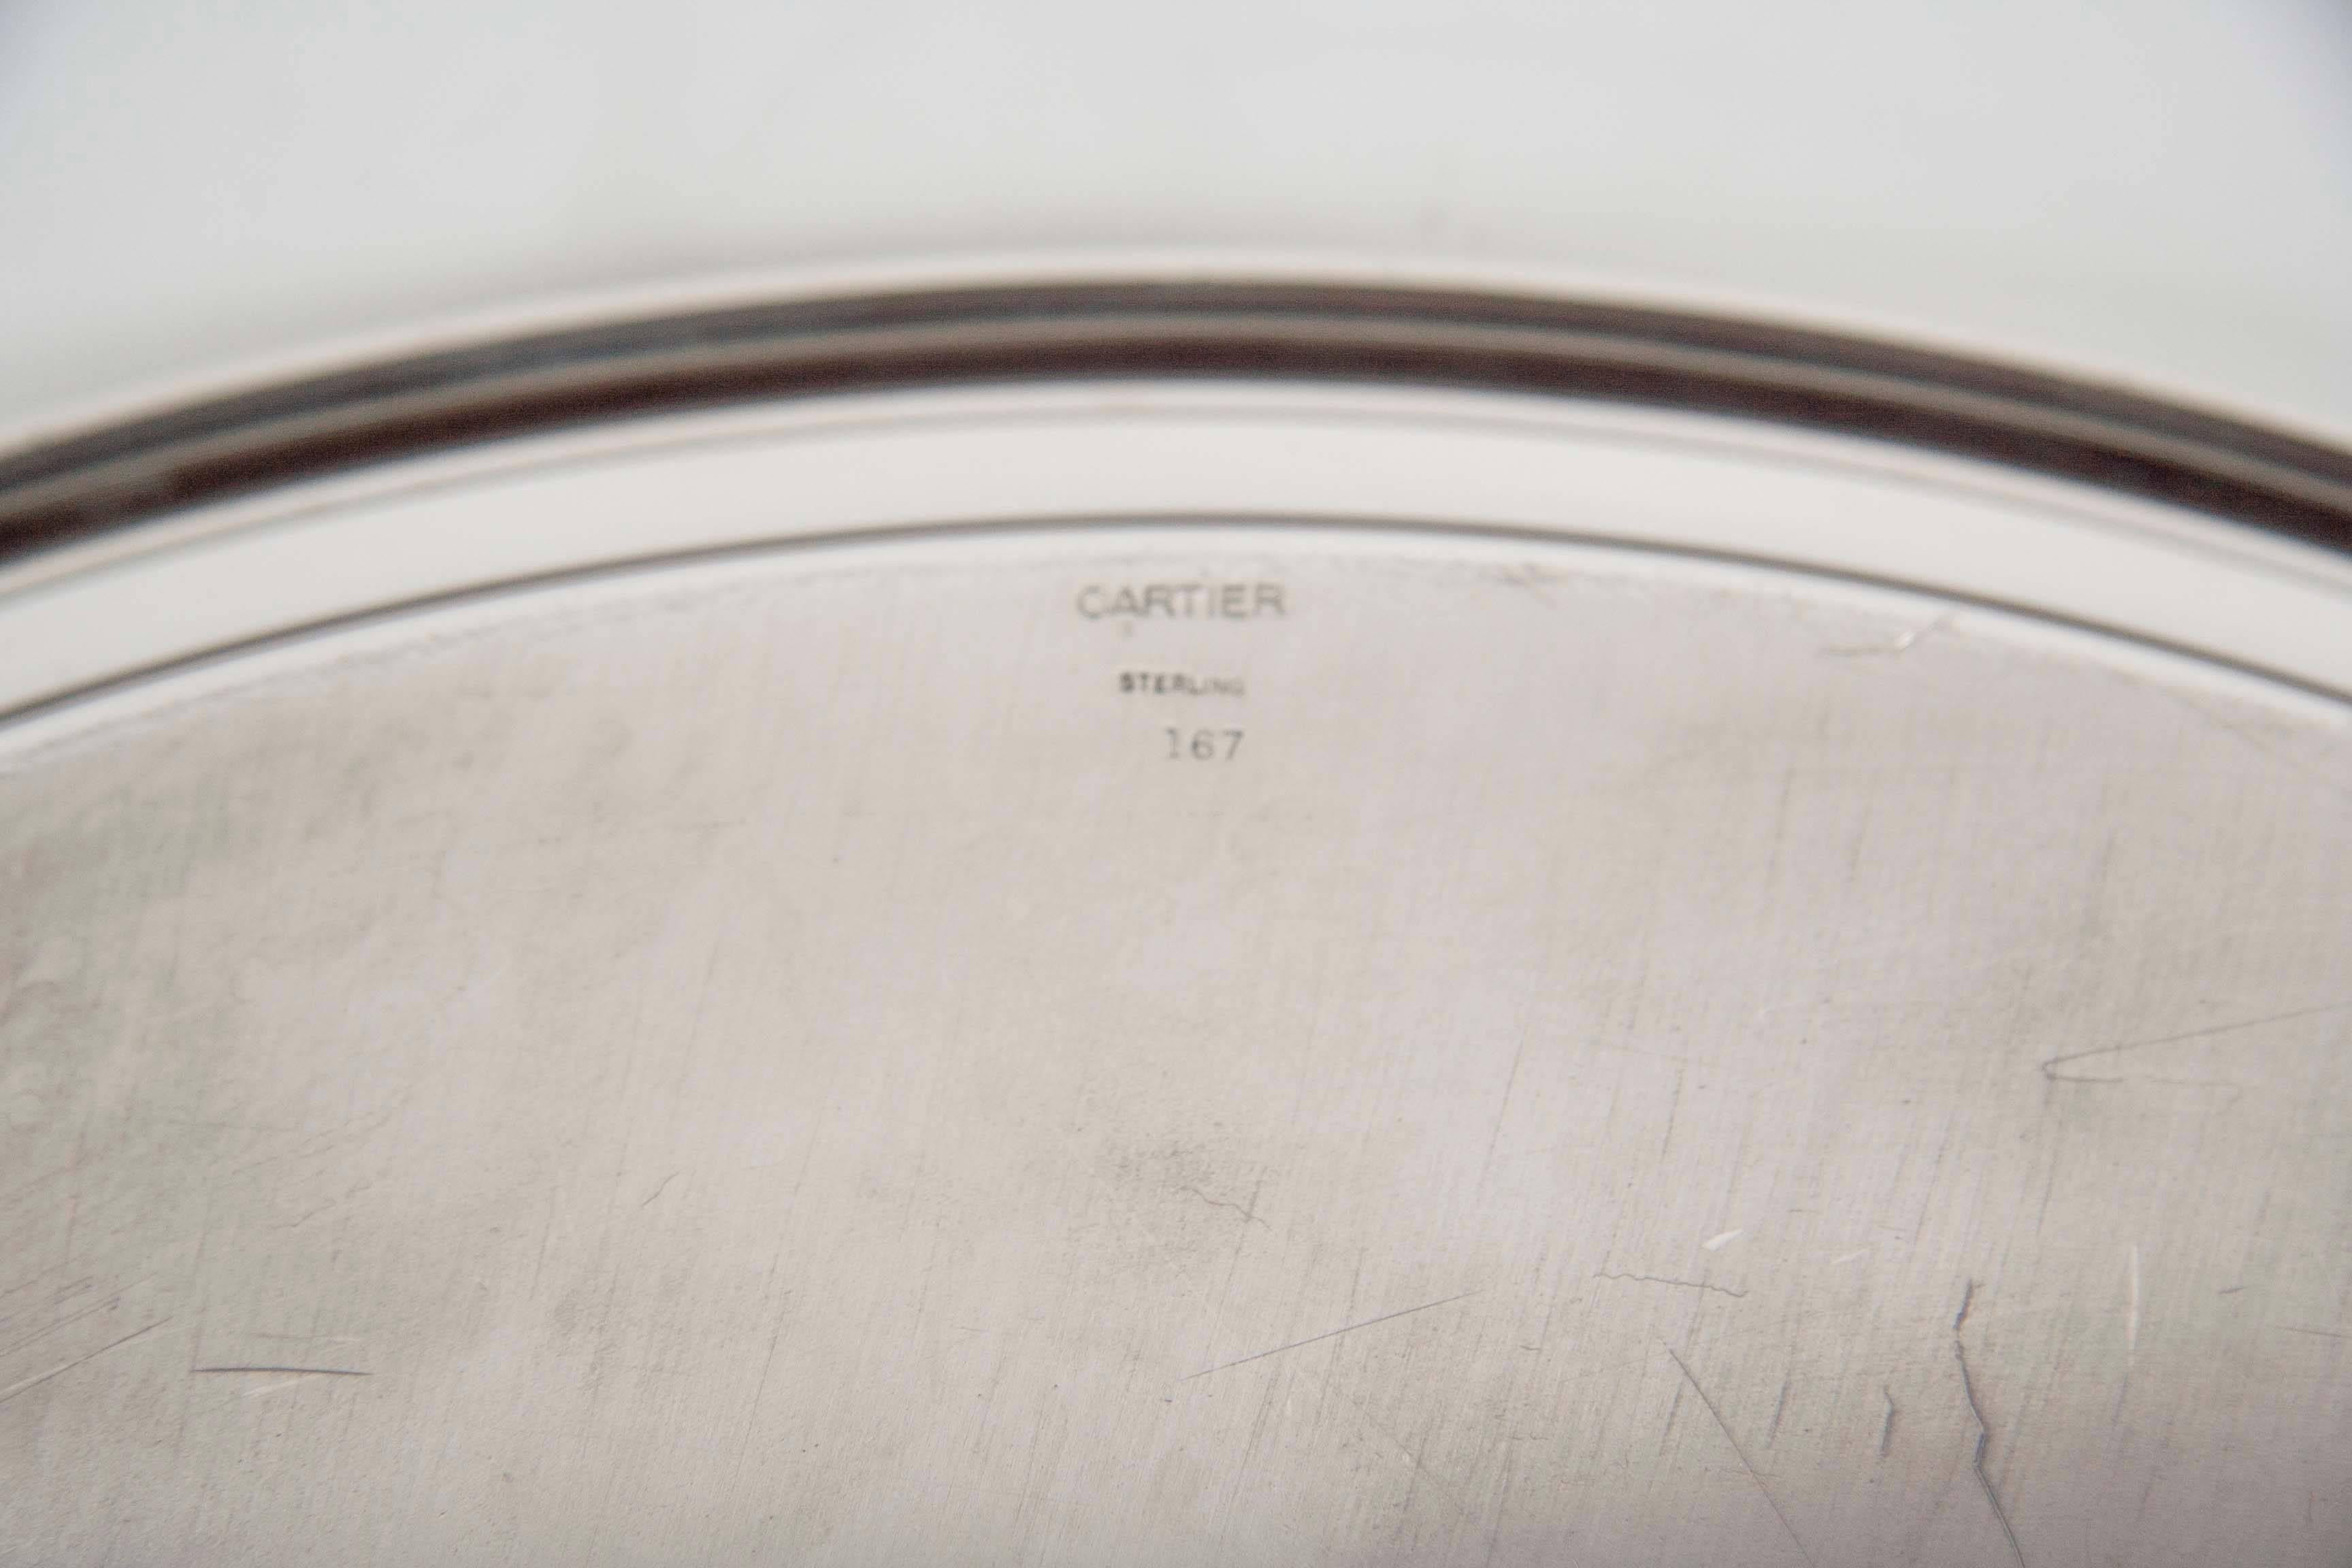 Cartier Sterling Silver Tray 2